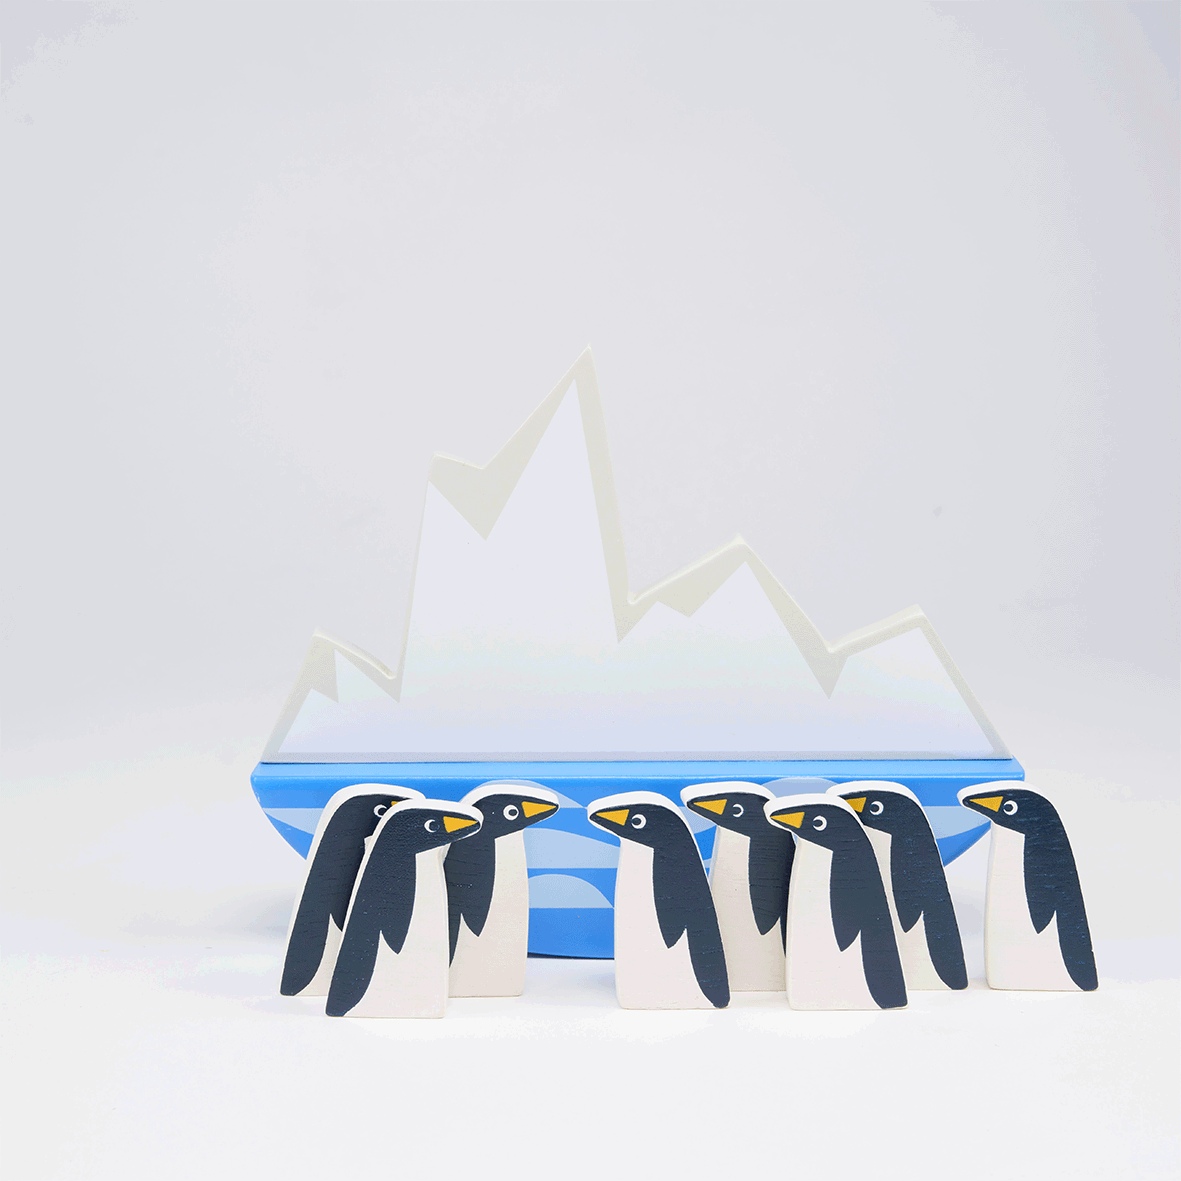 Video showing wooden toy penguin stacking game.  Penguins are balanced on a rocking iceberg platform.